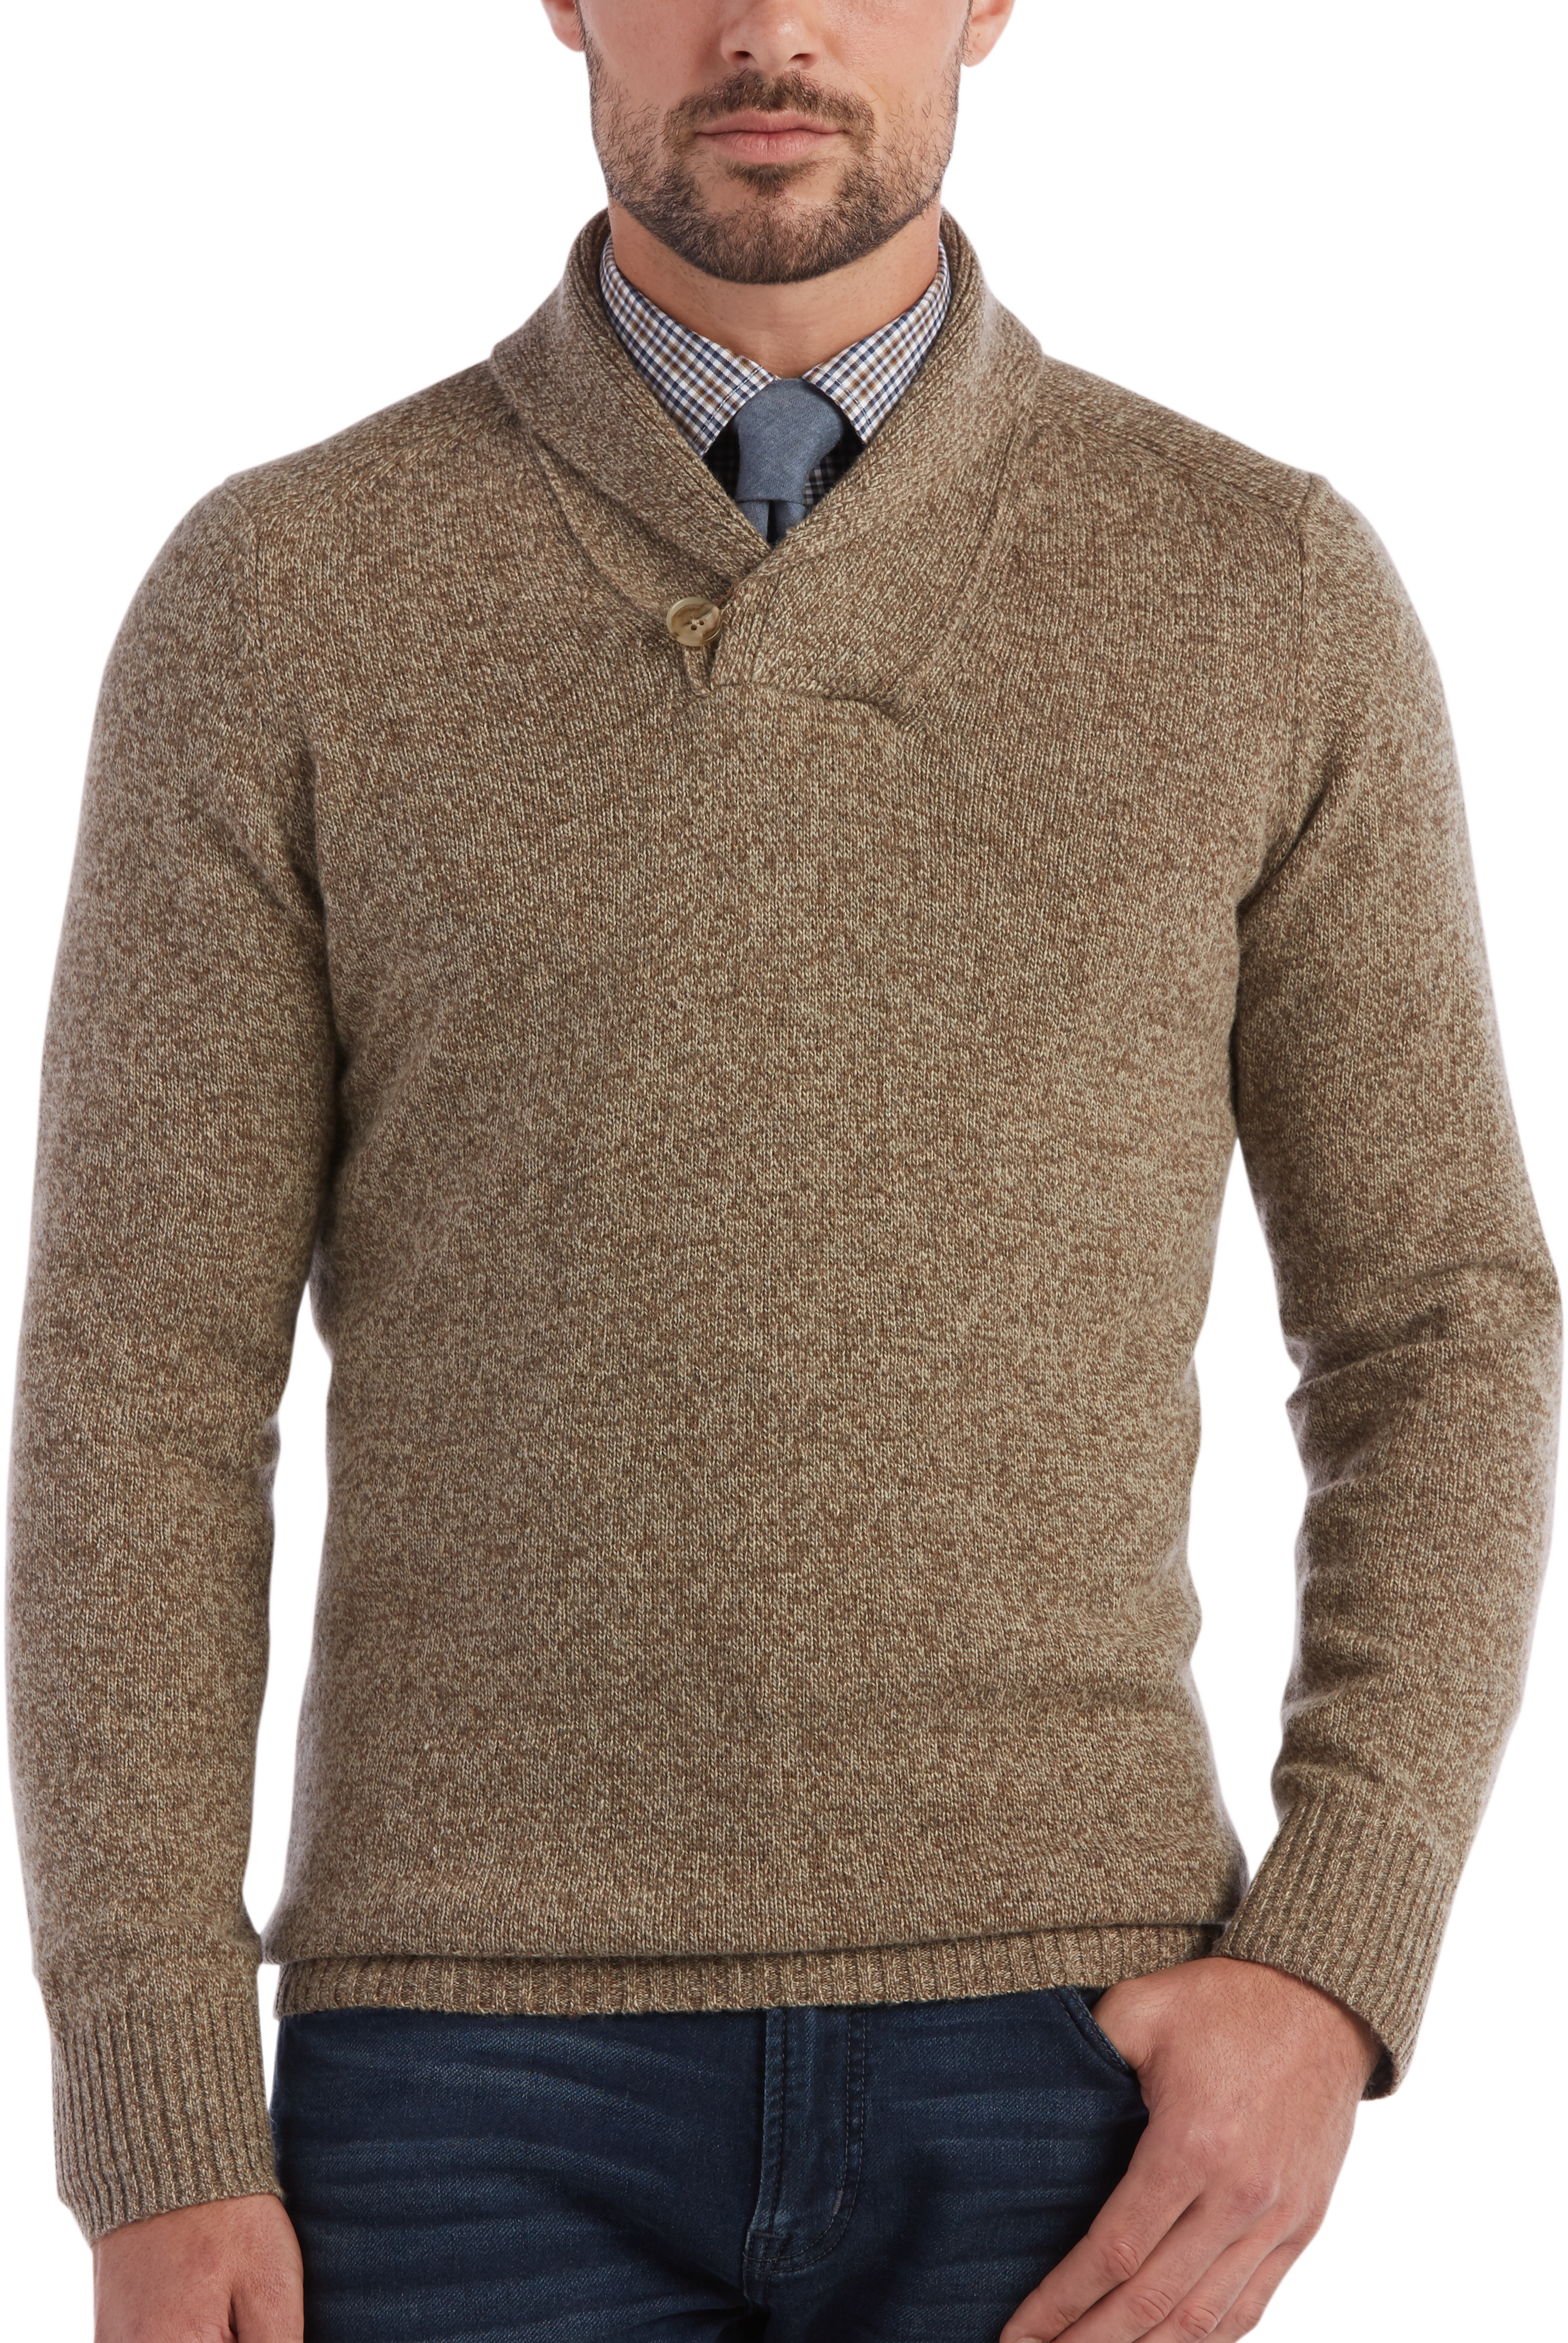 Mens Shawl Collar Slim Fit Knitted Sweater Pullovers Long